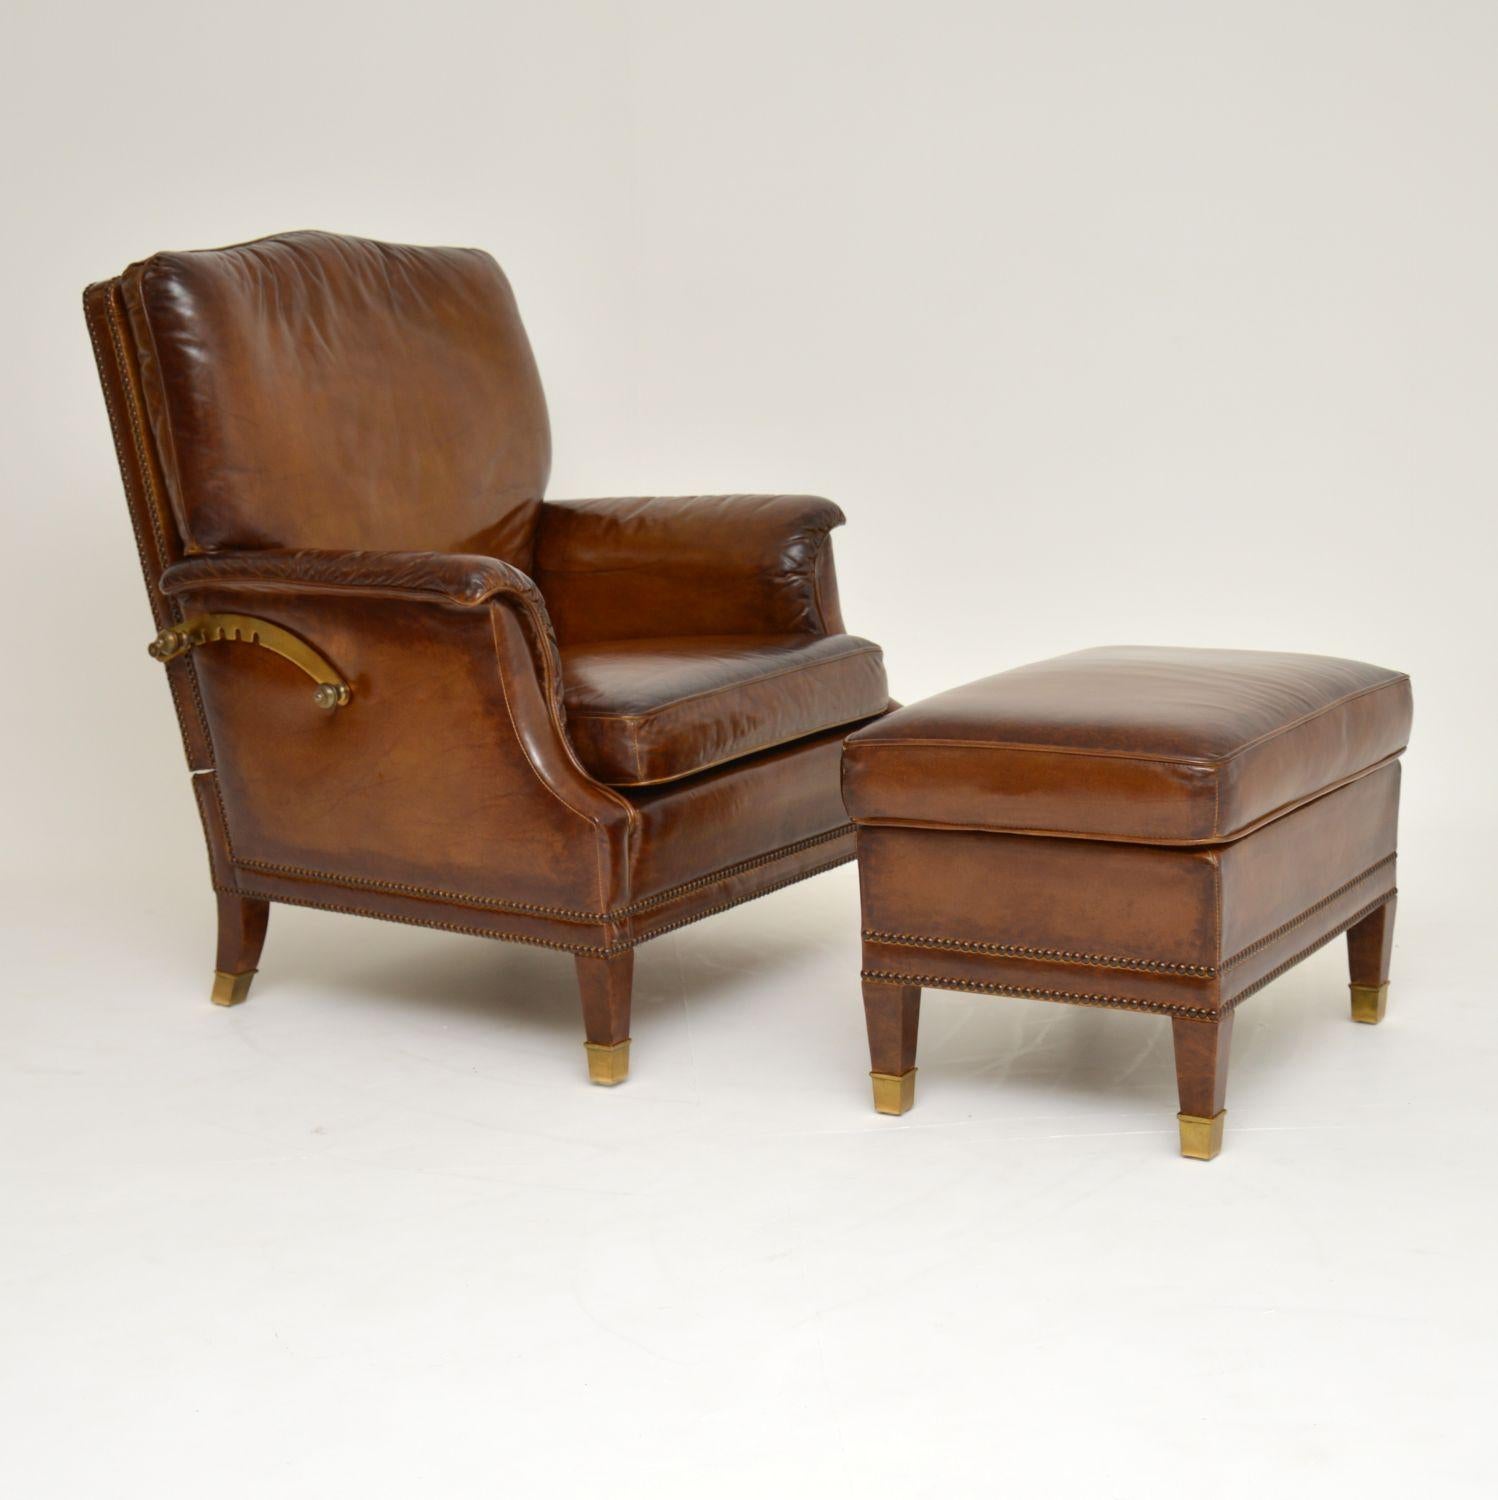 This very stylish, functional and comfortable reclining leather armchair with matching footstool has just come over from Sweden and I would date it to circa 1960s period.

This chair and stool is covered in a lovely color brown leather with lots